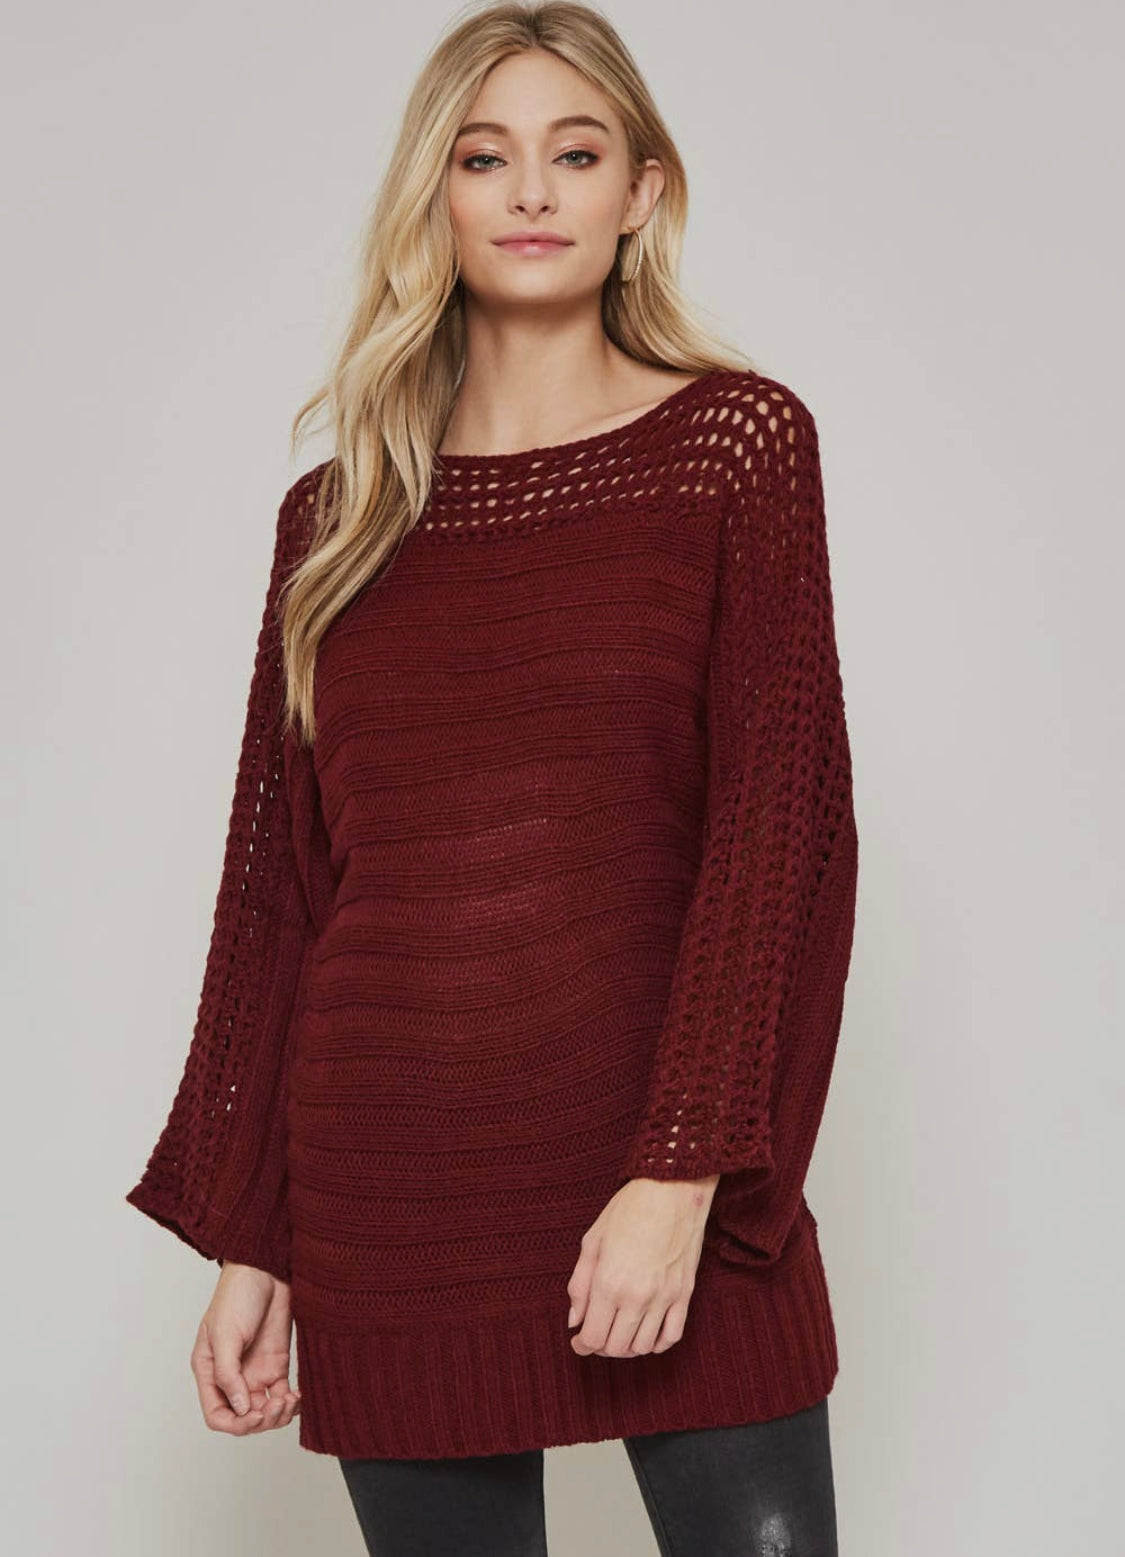 Solid Maroon Sweater with an Open Weave Knit Neckline